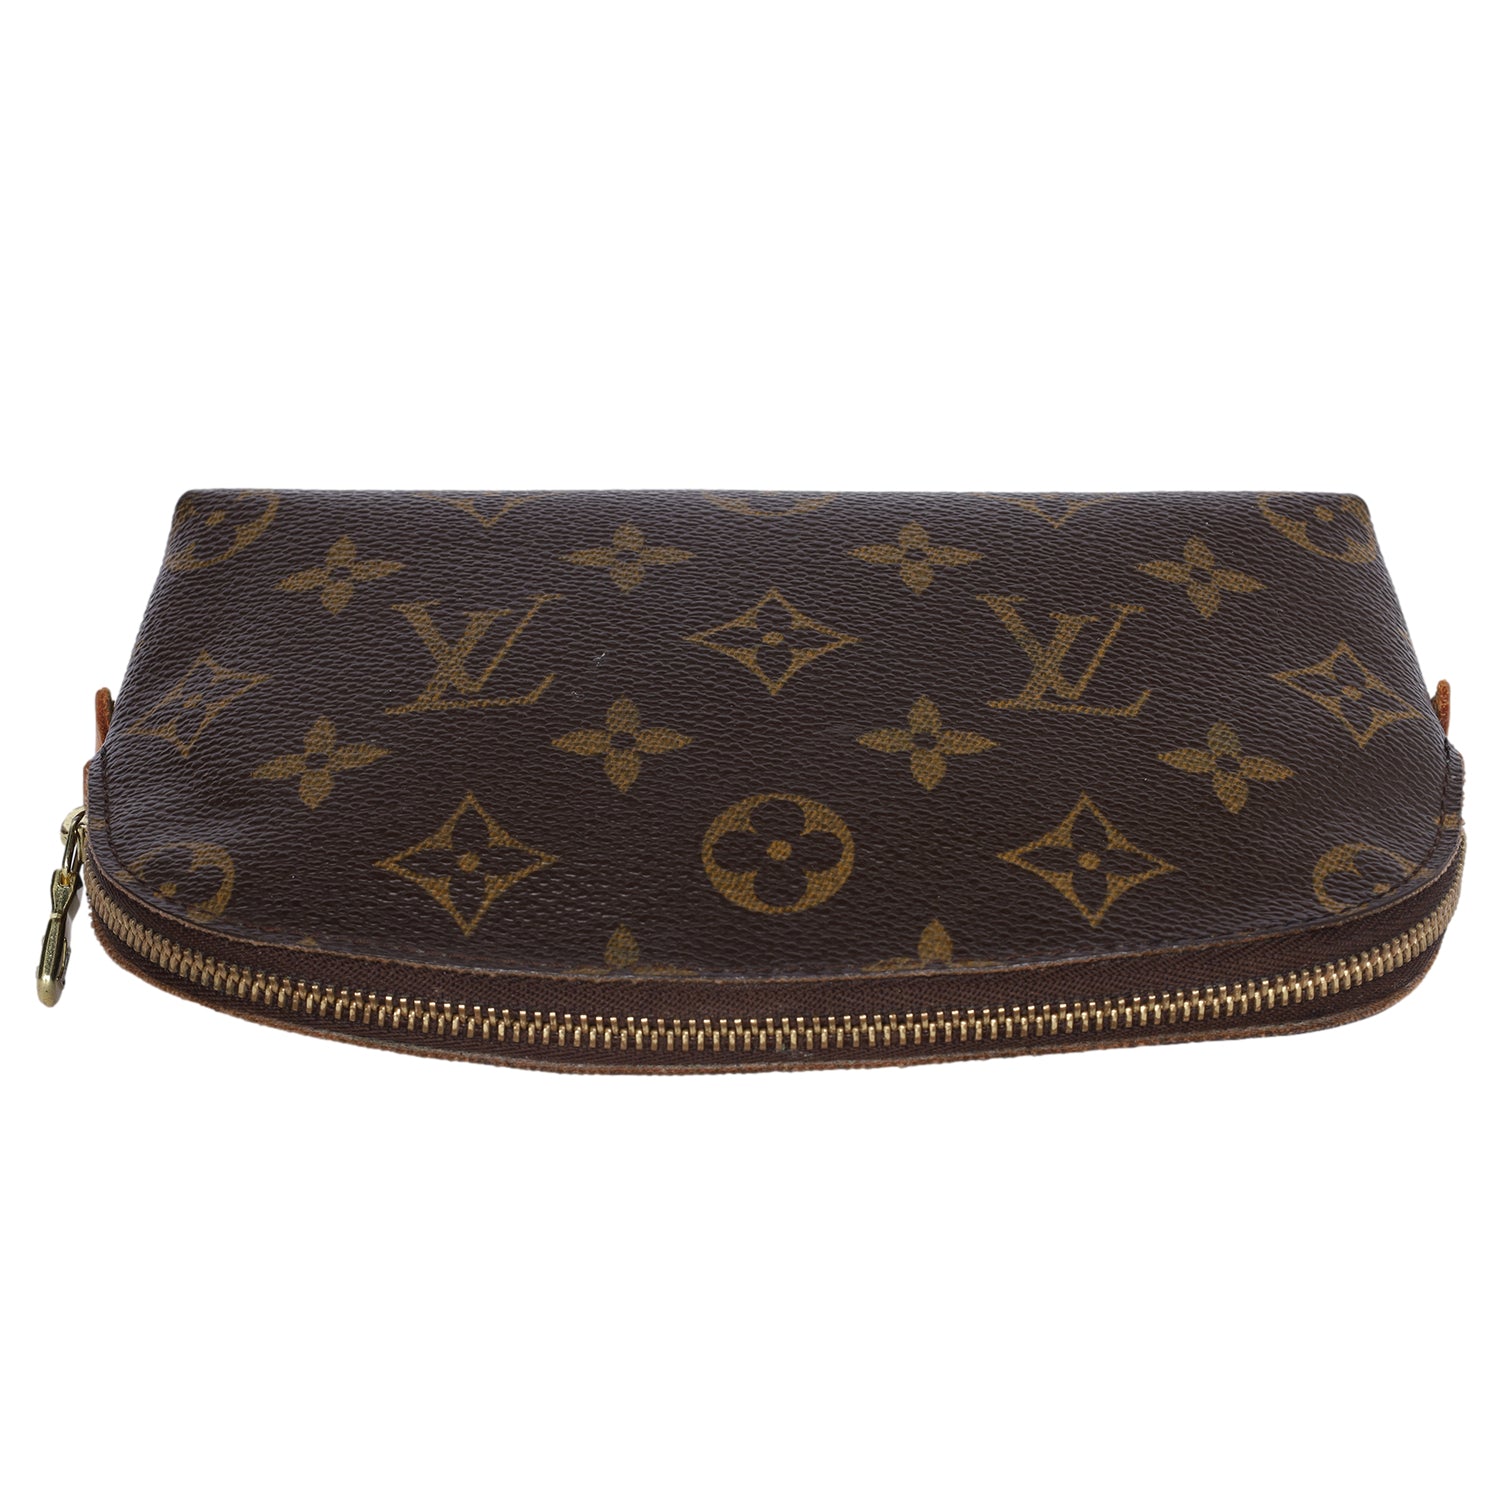 Buy Pre-Owned LOUIS VUITTON Toiletry Pouch Bag Monogram